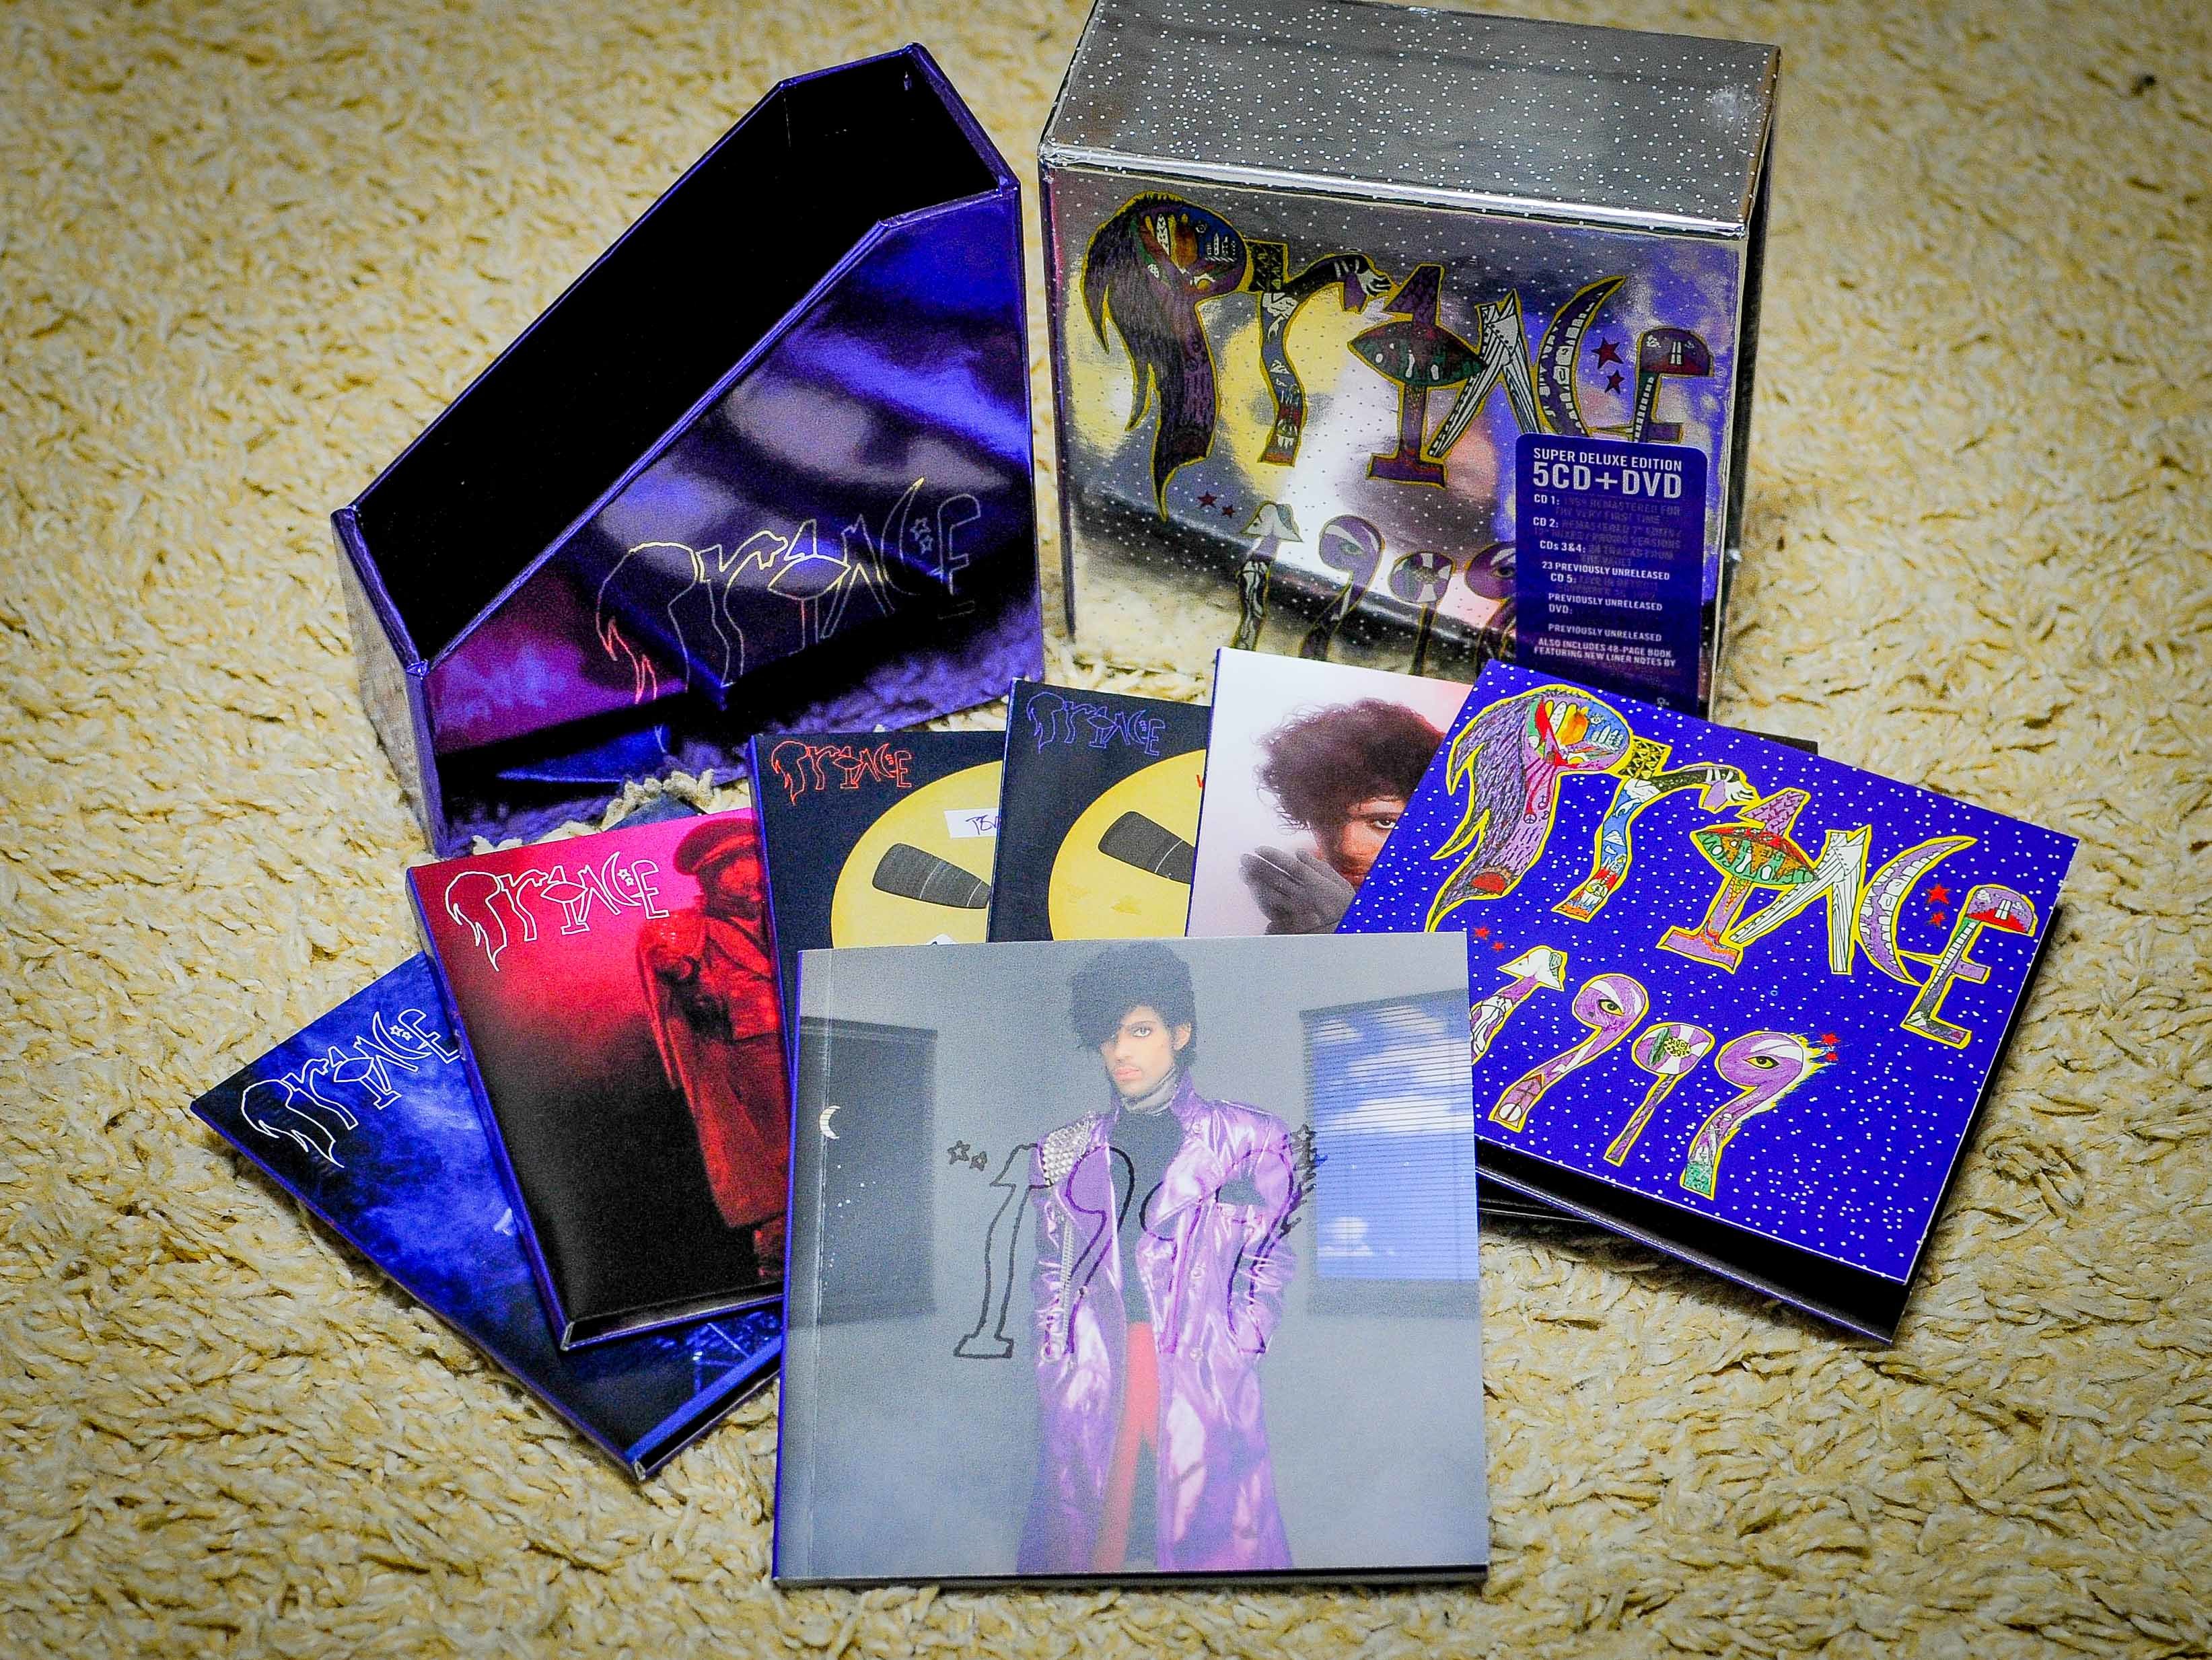 Prince - 1999 Deluxe Edition - Prince